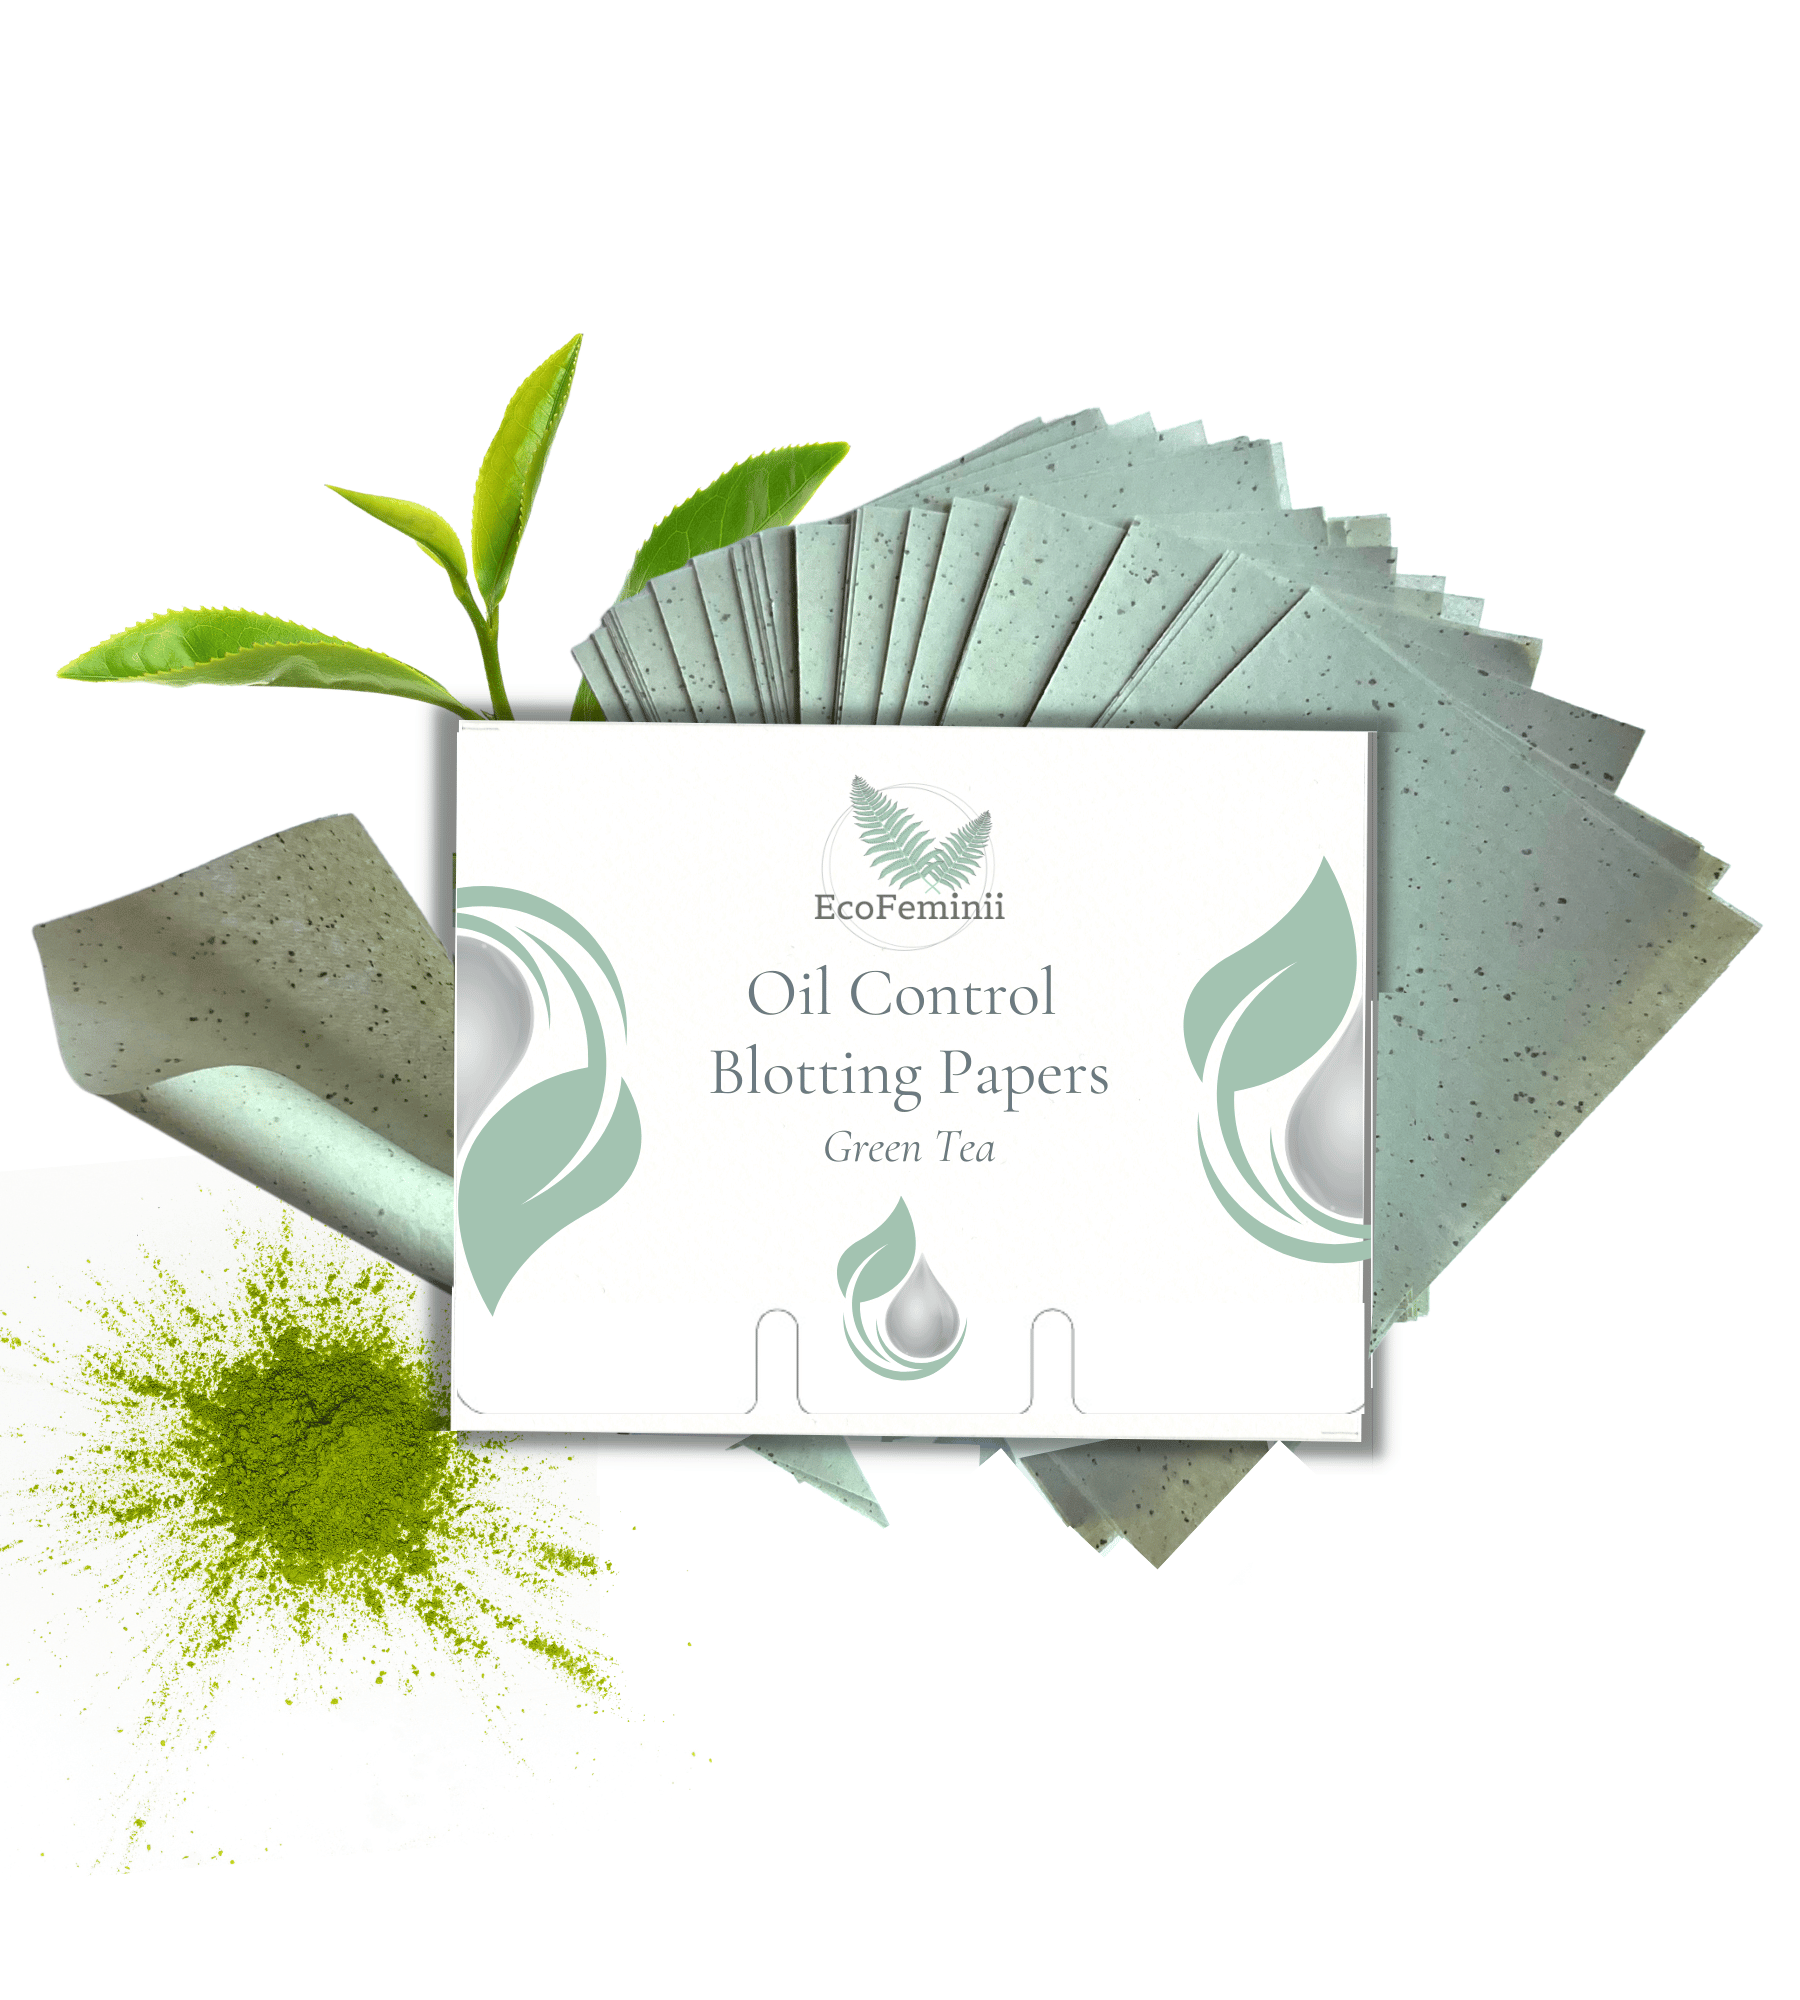 Green tea oil control blotting papers - GENTLE, YET ABSORBENT - With the added benefit of antioxidants and anti-inflammatory properties, our green tea-infused pure hemp &amp; softwood pulp papers are soft and kind to sensitive skin. Perfect for acne-prone complexions.